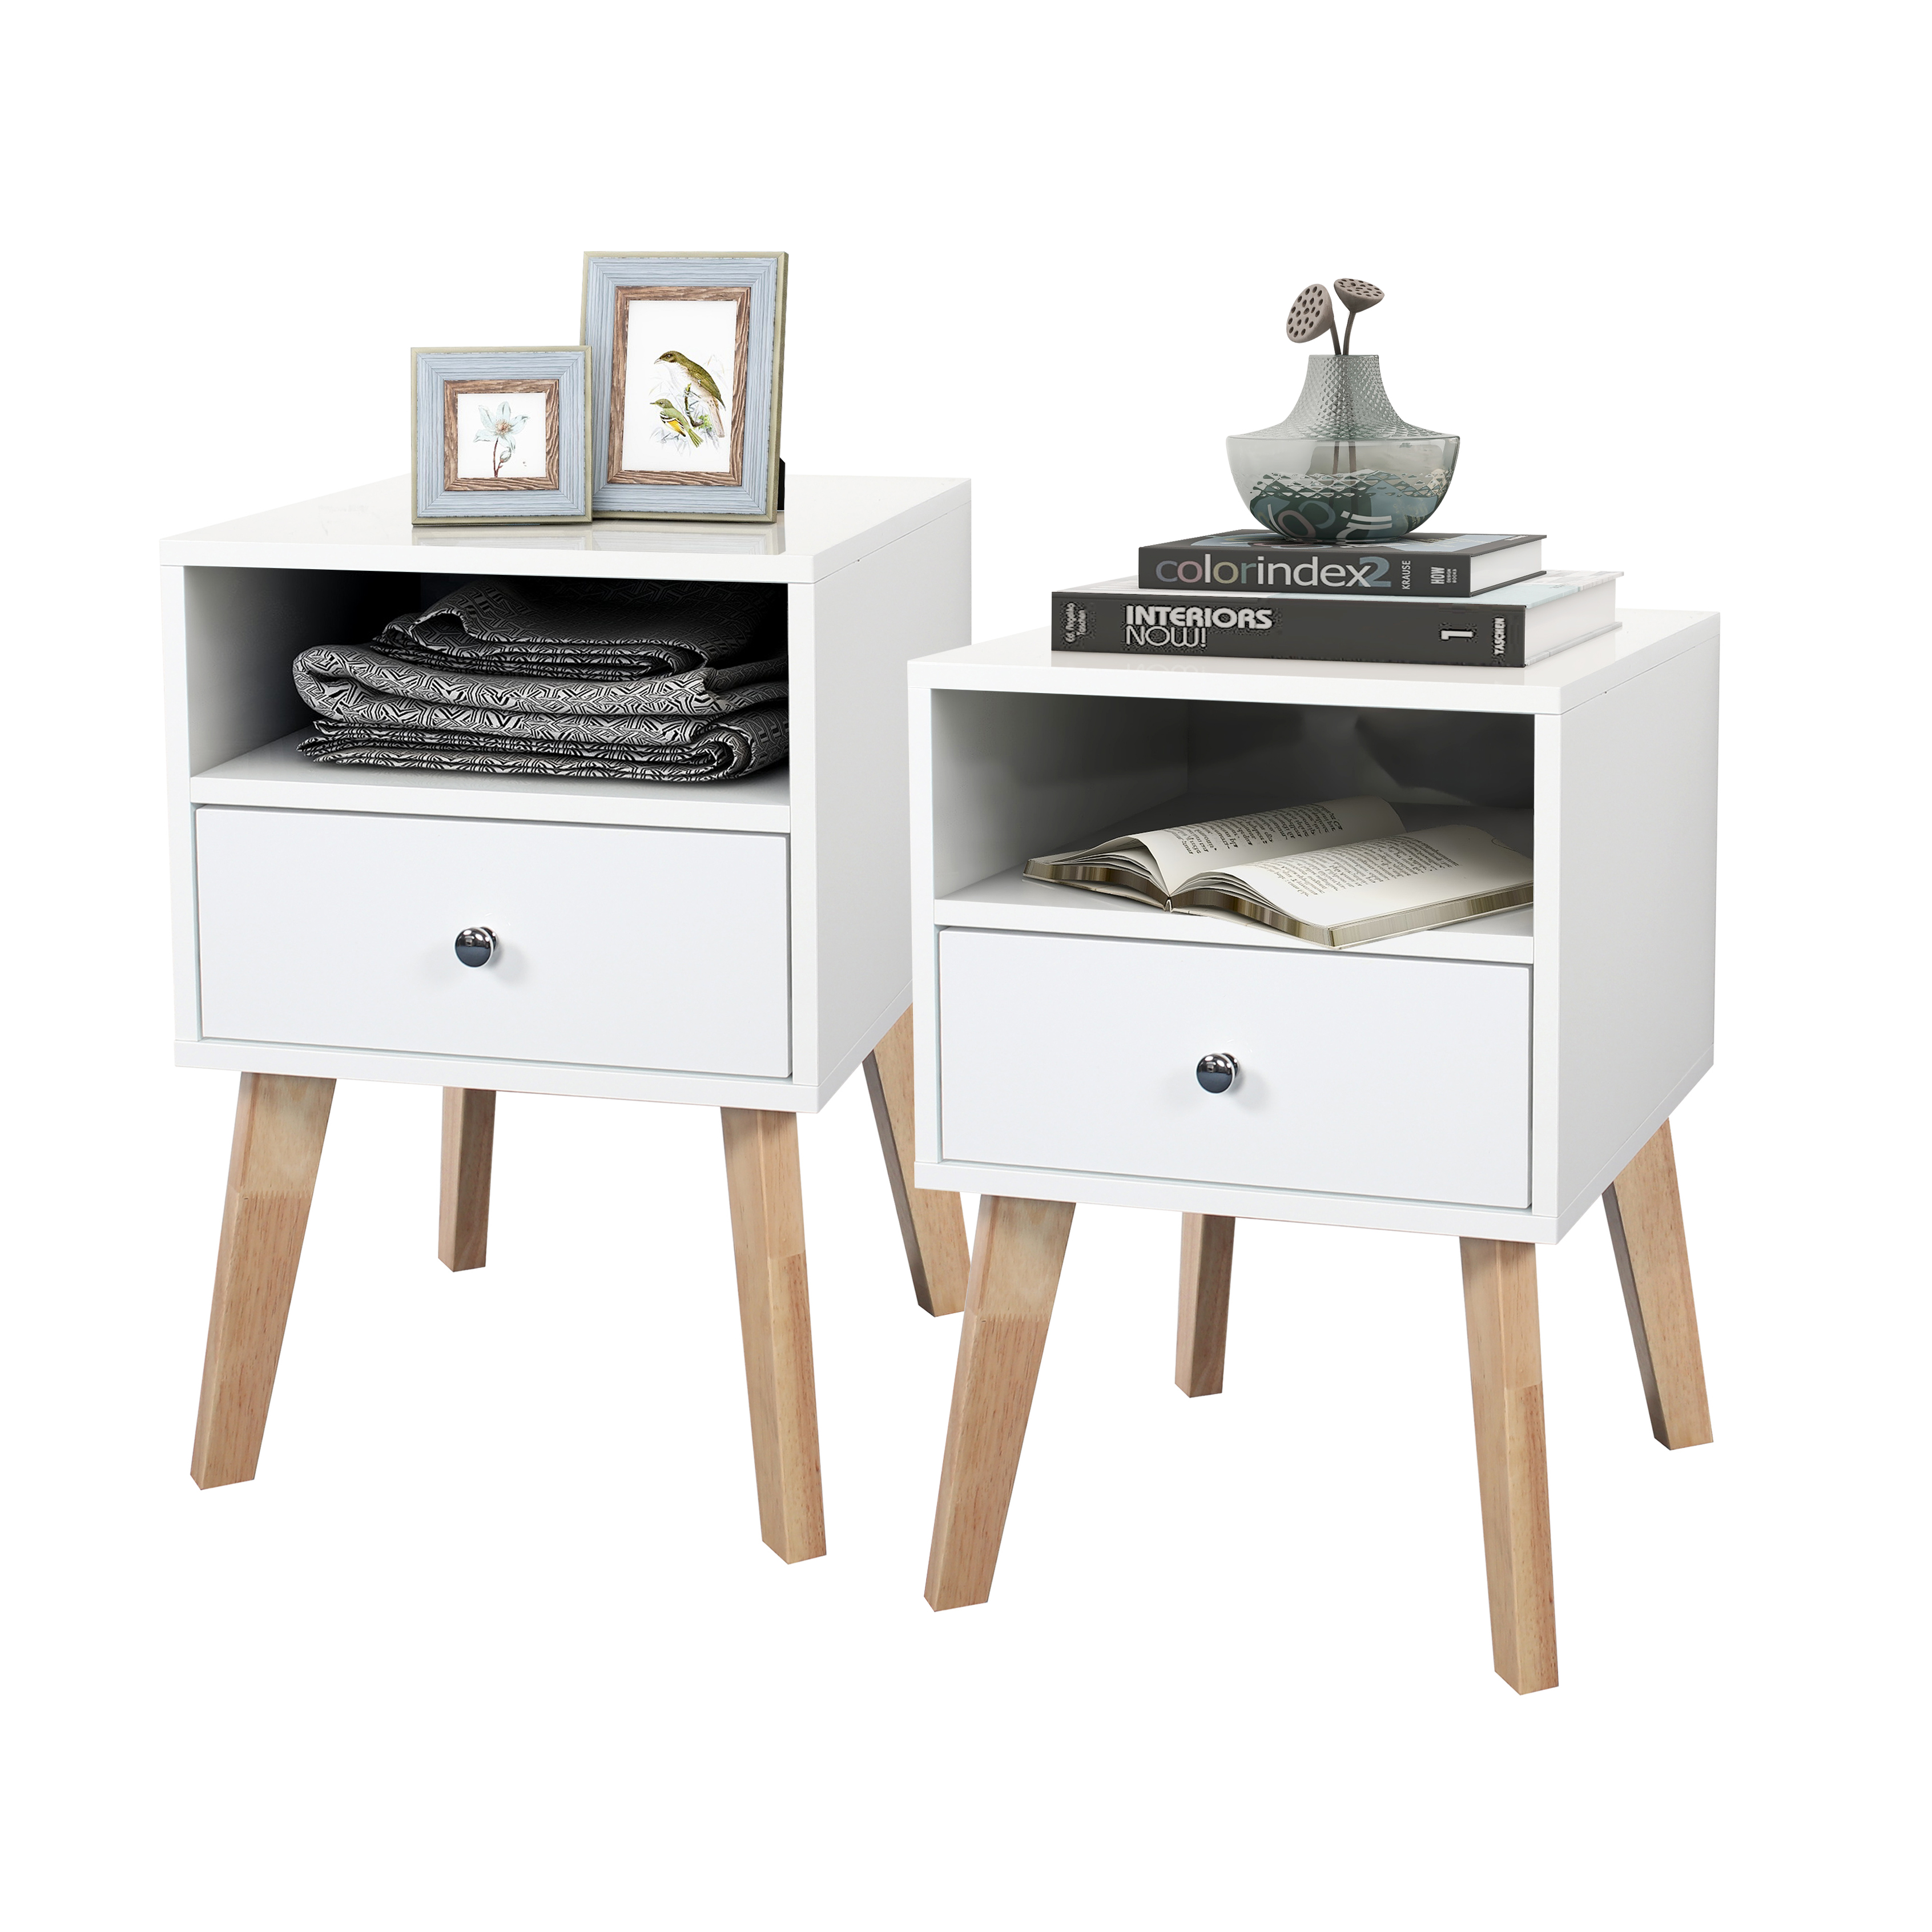 High gloss white bedside table bedroom set 2 bedside tables with open shelves in bedroom-CASAINC